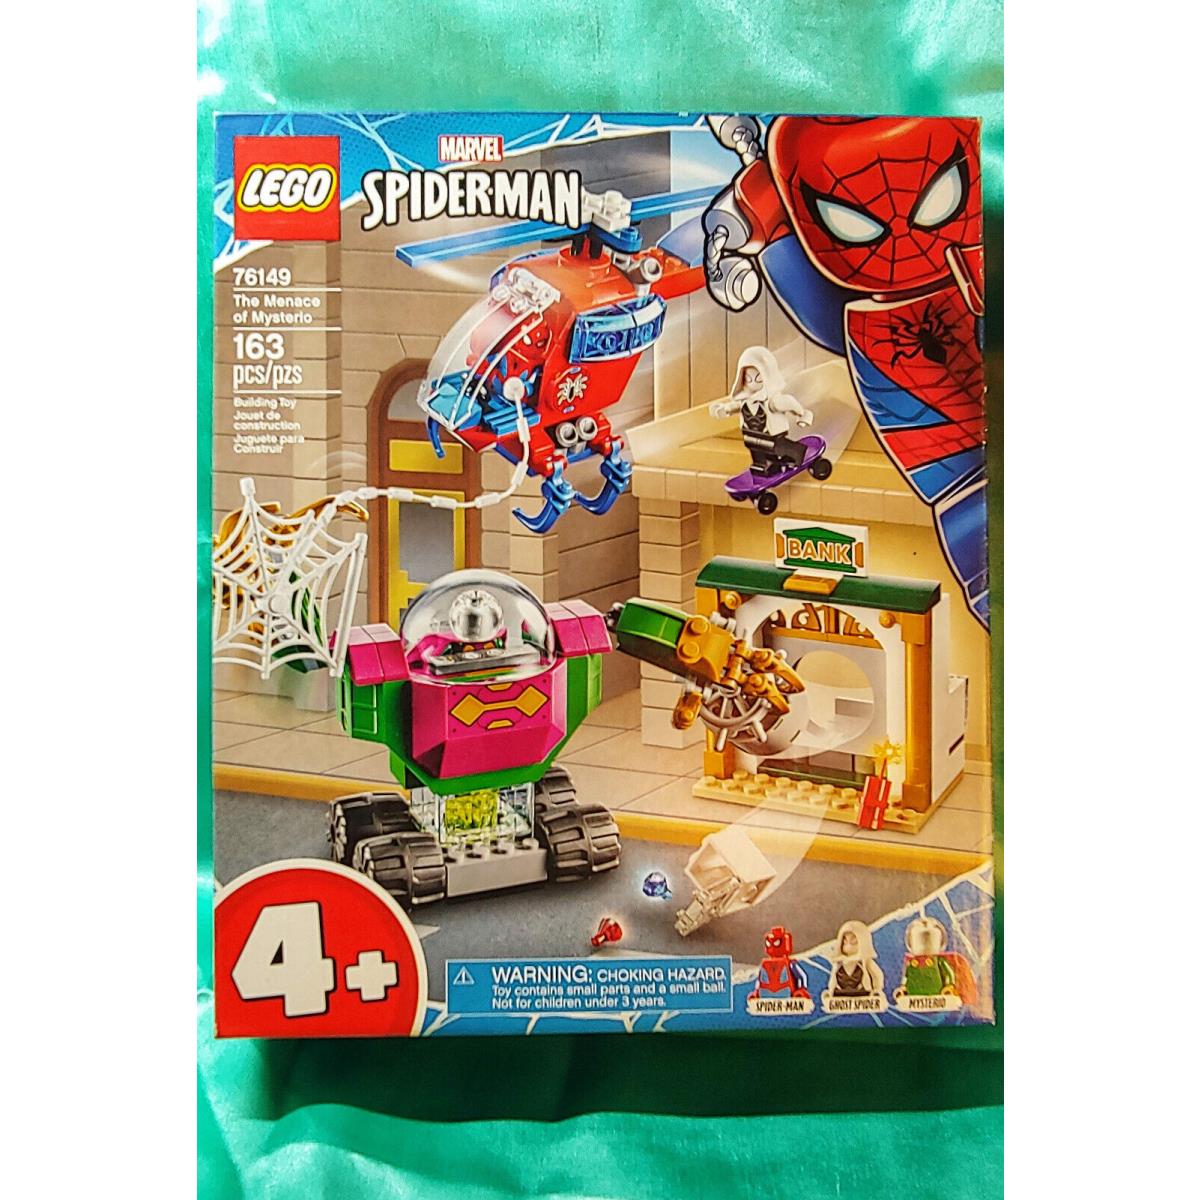 Lego Marvel Super Heroes The Menace of Mysterio 76149 Spiderman